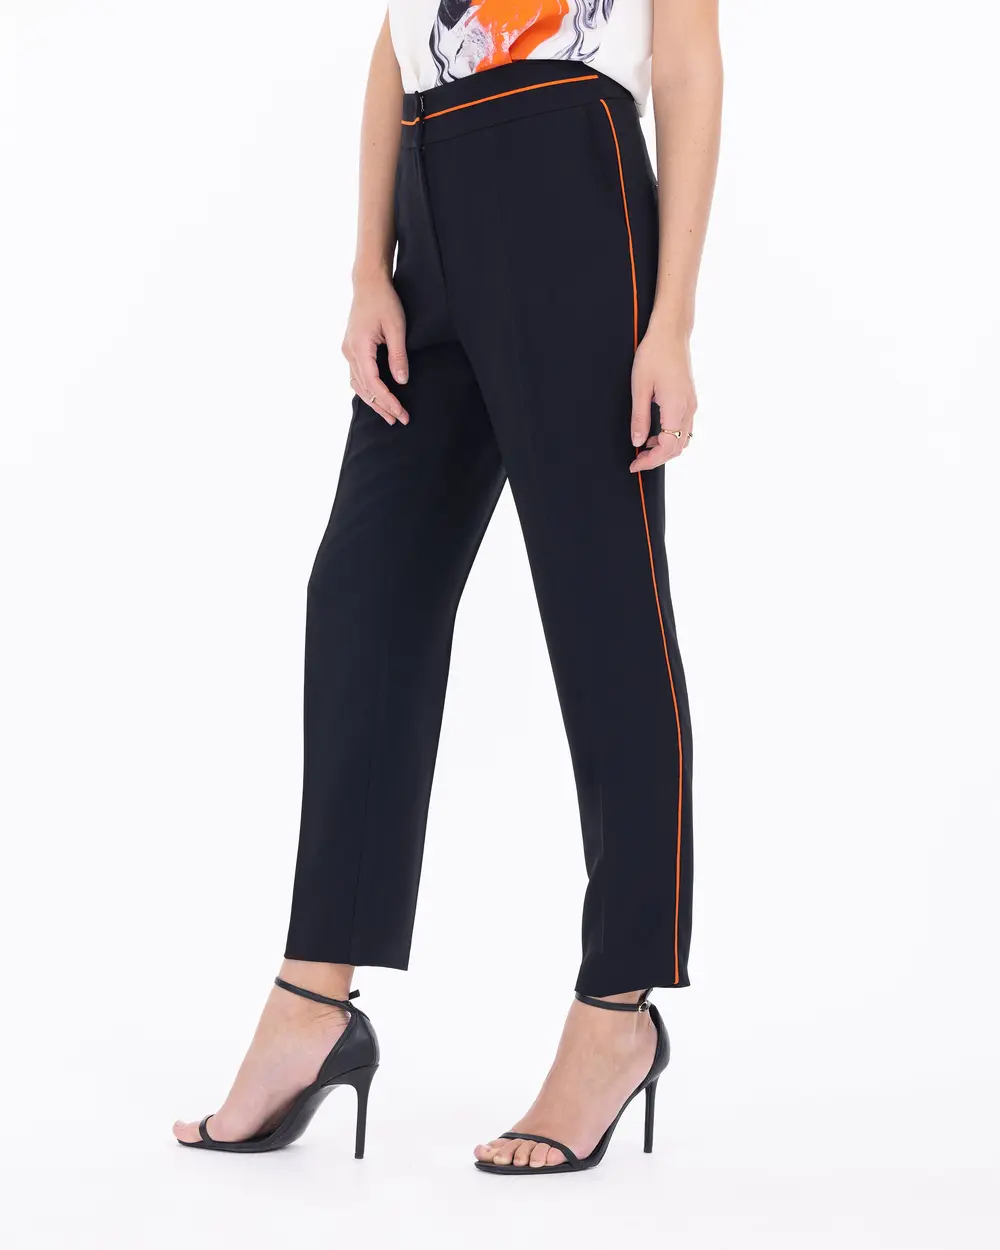 Stripe Detailed Classic Cut Ankle Length Trousers